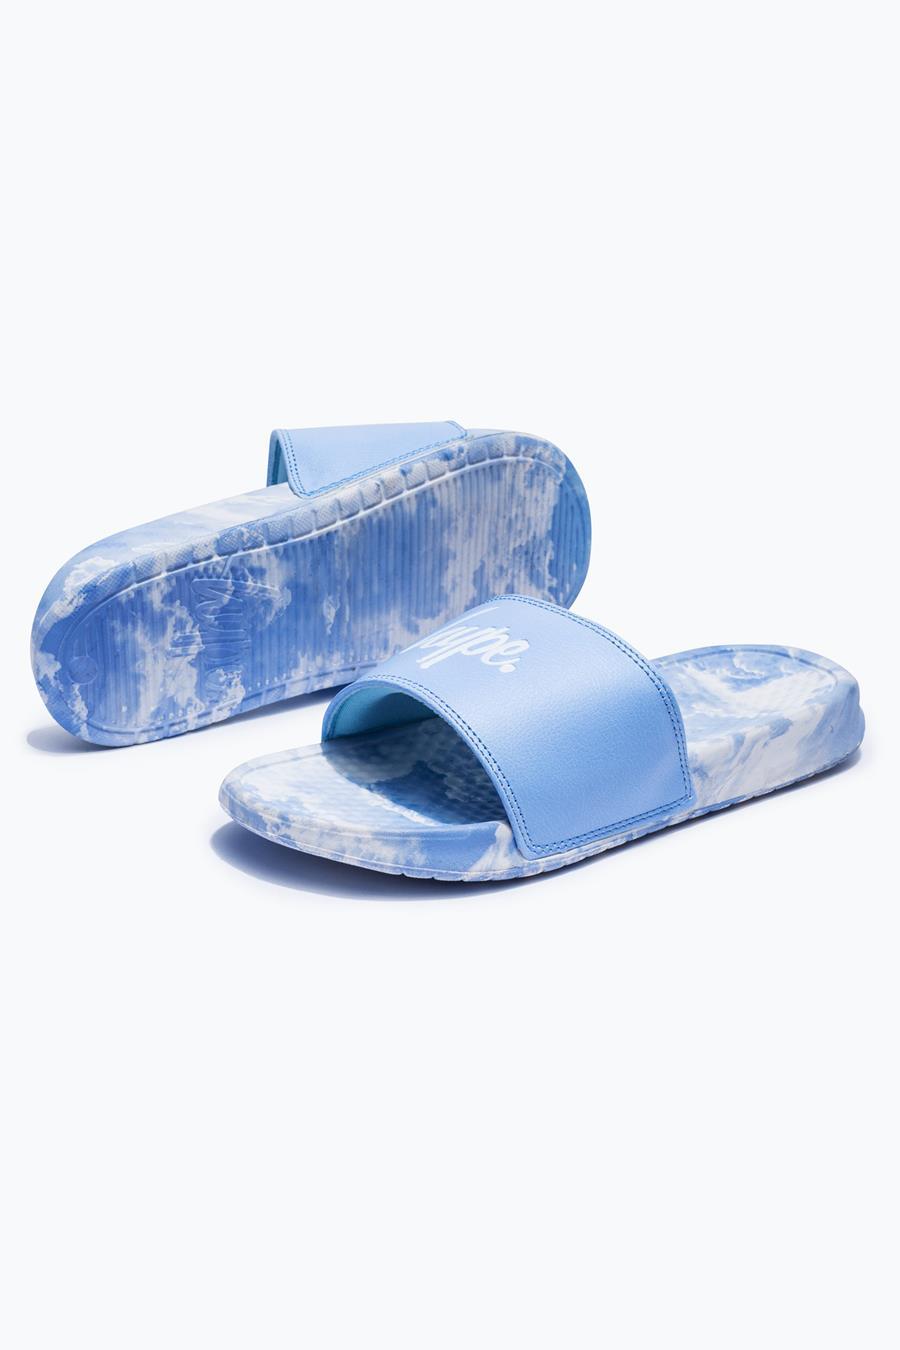 Hype Blue Clouds Sliders | Size UK11